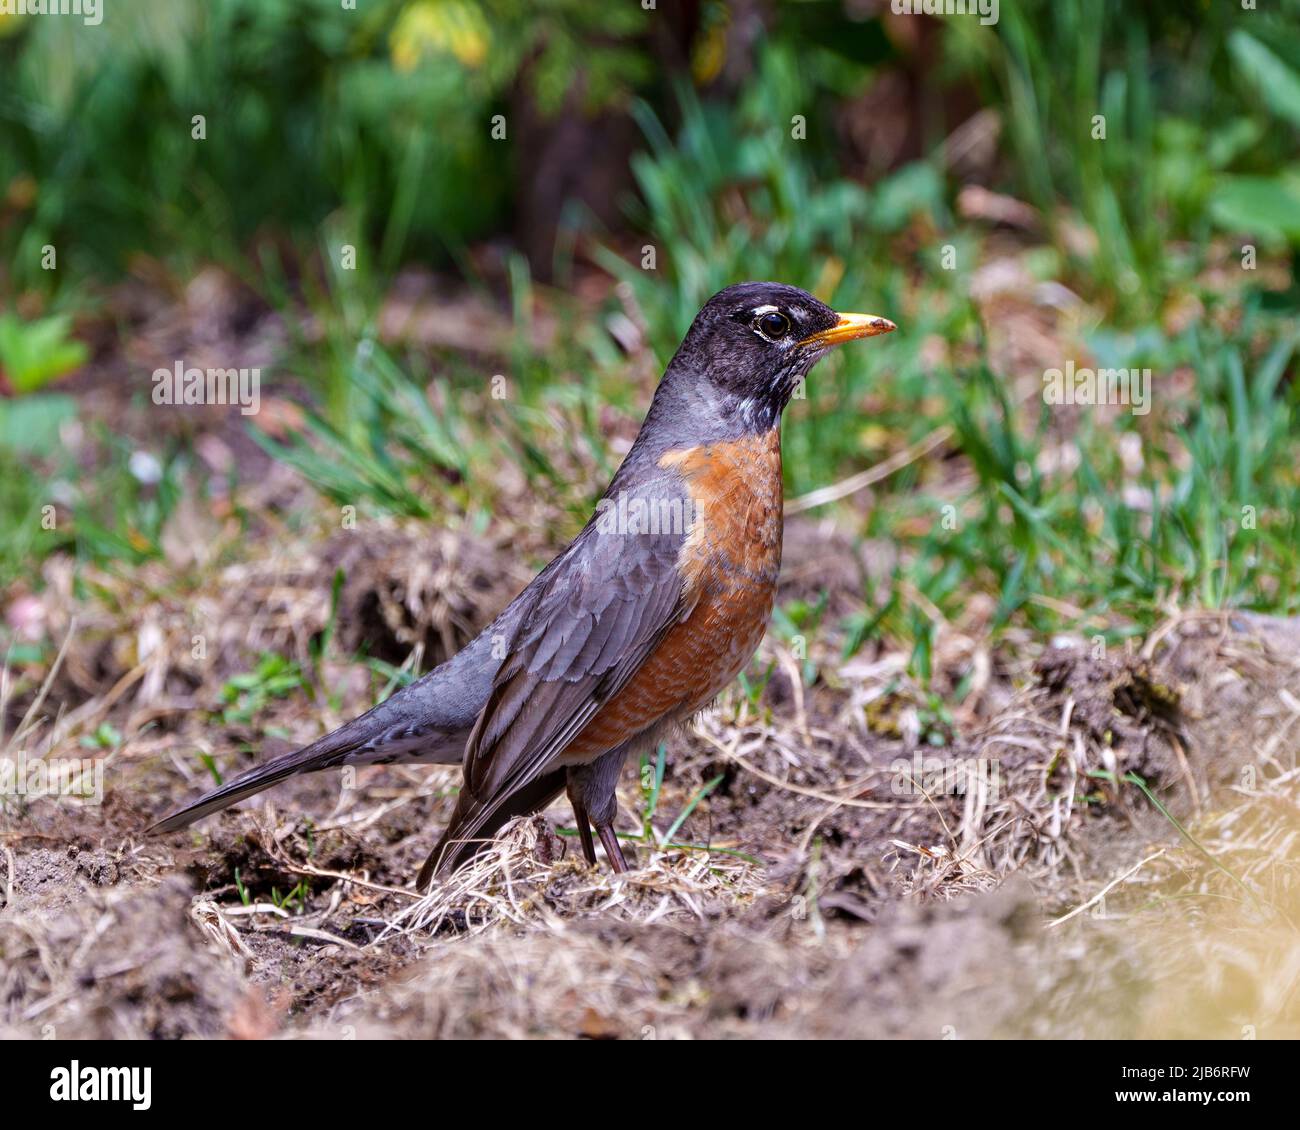 American Robin bird standing on ground and foraging for food with blur background in its environment and habitat surrounding displaying plumage. Stock Photo